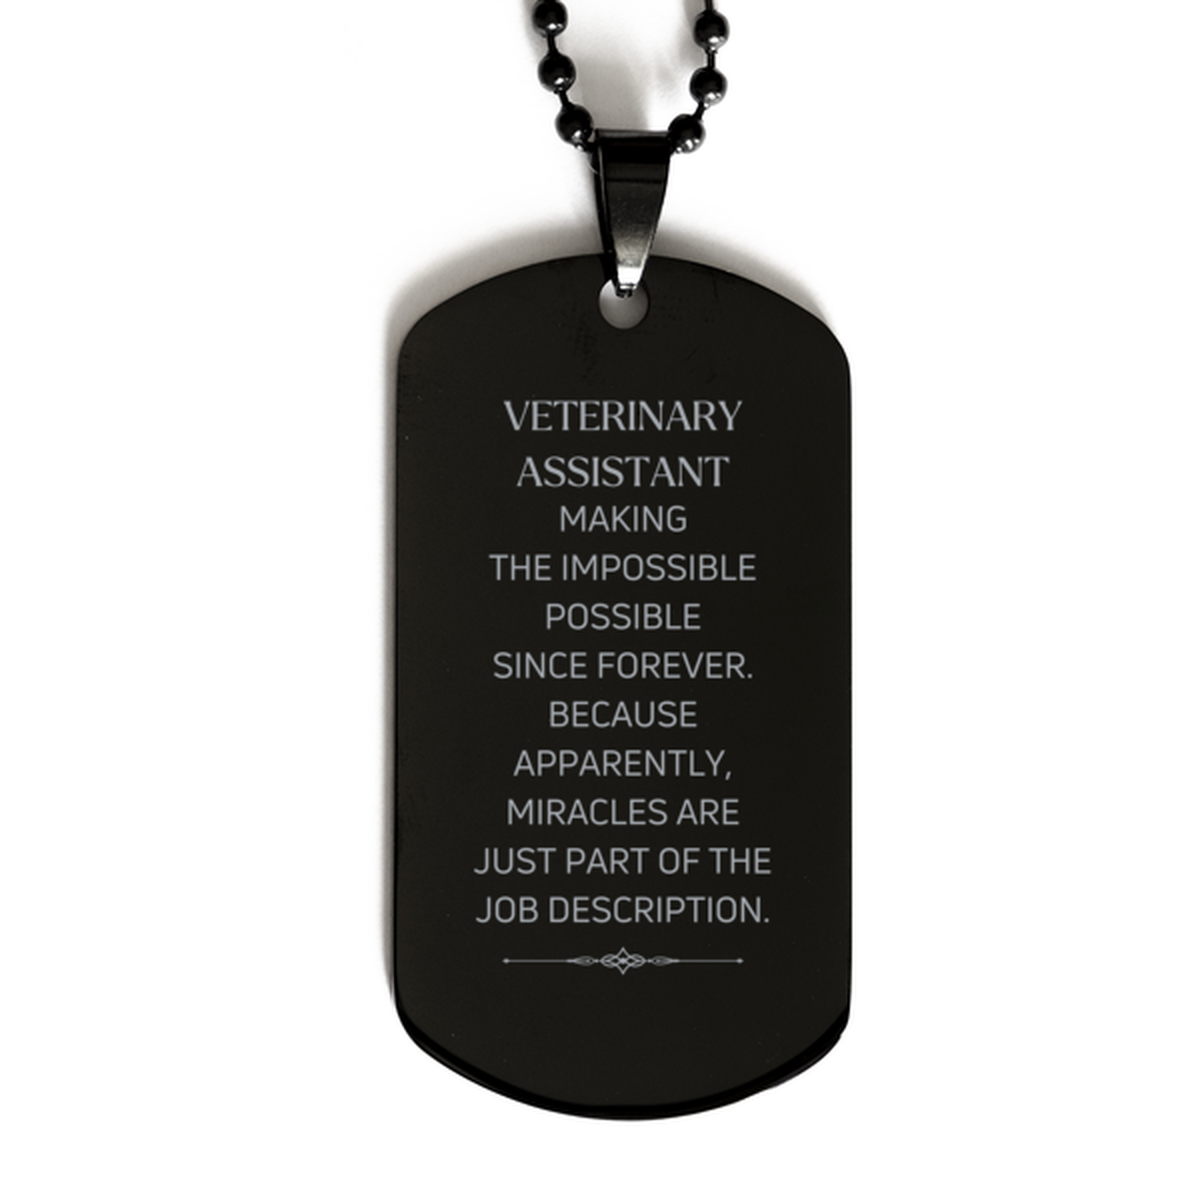 Funny Veterinary Assistant Gifts, Miracles are just part of the job description, Inspirational Birthday Black Dog Tag For Veterinary Assistant, Men, Women, Coworkers, Friends, Boss